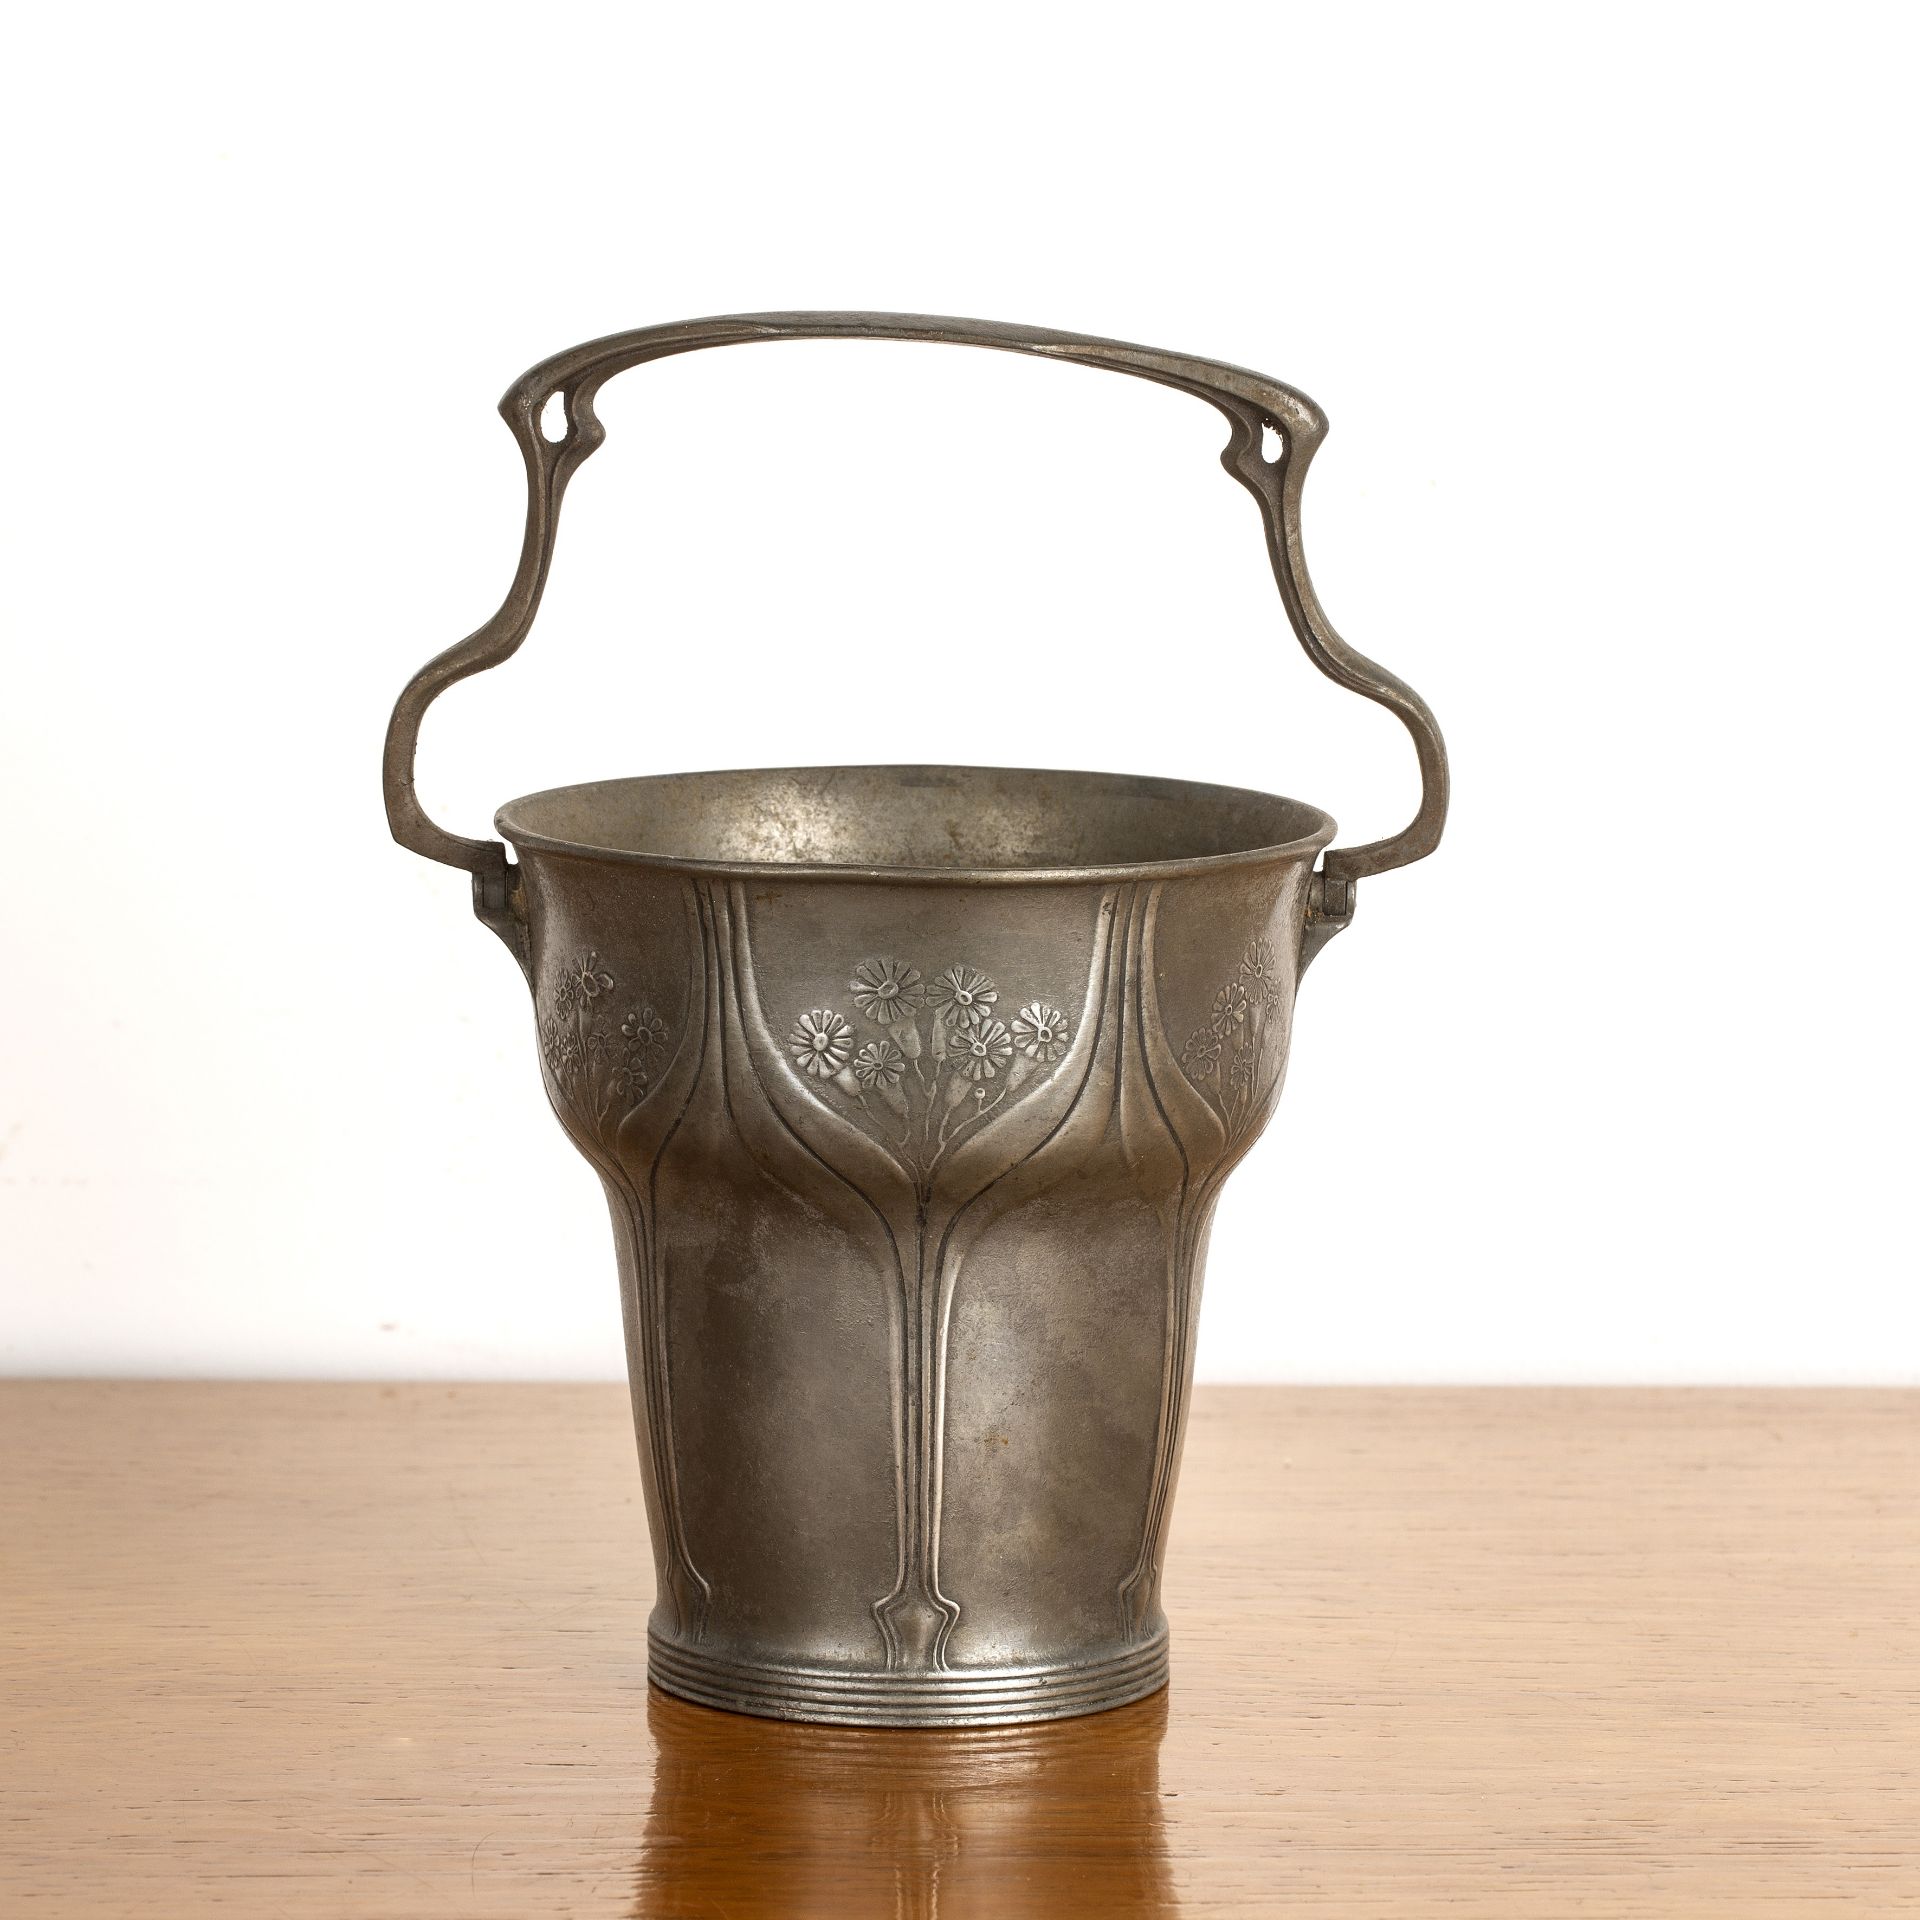 Orivit pewter, Art Nouveau style basket, decorated with flowers, stamped marks and numbers '2319' to - Image 2 of 3